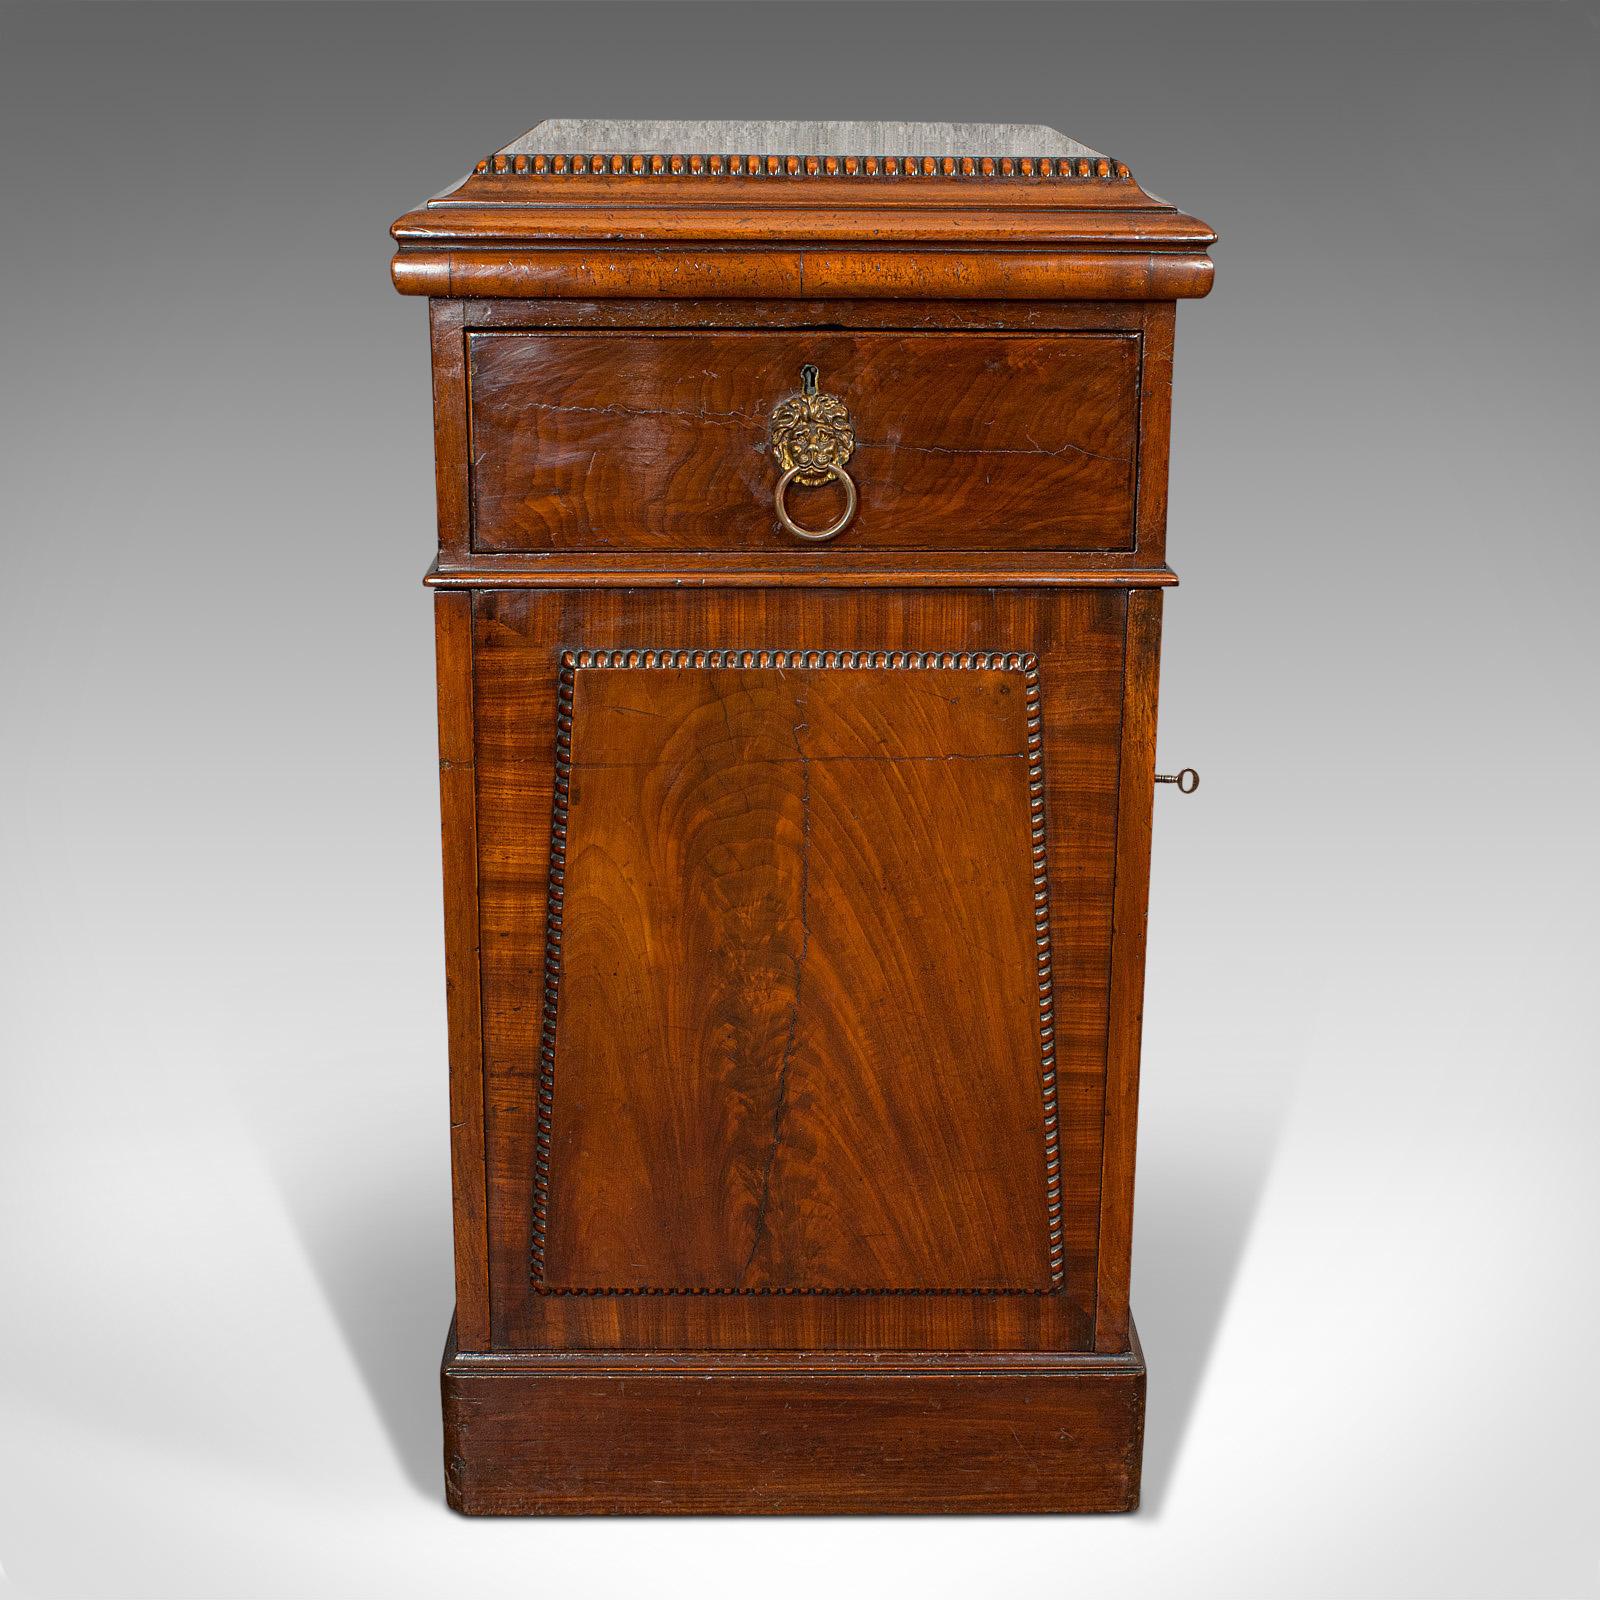 This is a tall antique side cabinet. An English, mahogany drawing room cabinet or bedside nightstand, dating to the Regency period, circa 1820.

Appealing Regency cabinetry with rich color
Displaying a desirable aged patina
Select mahogany shows